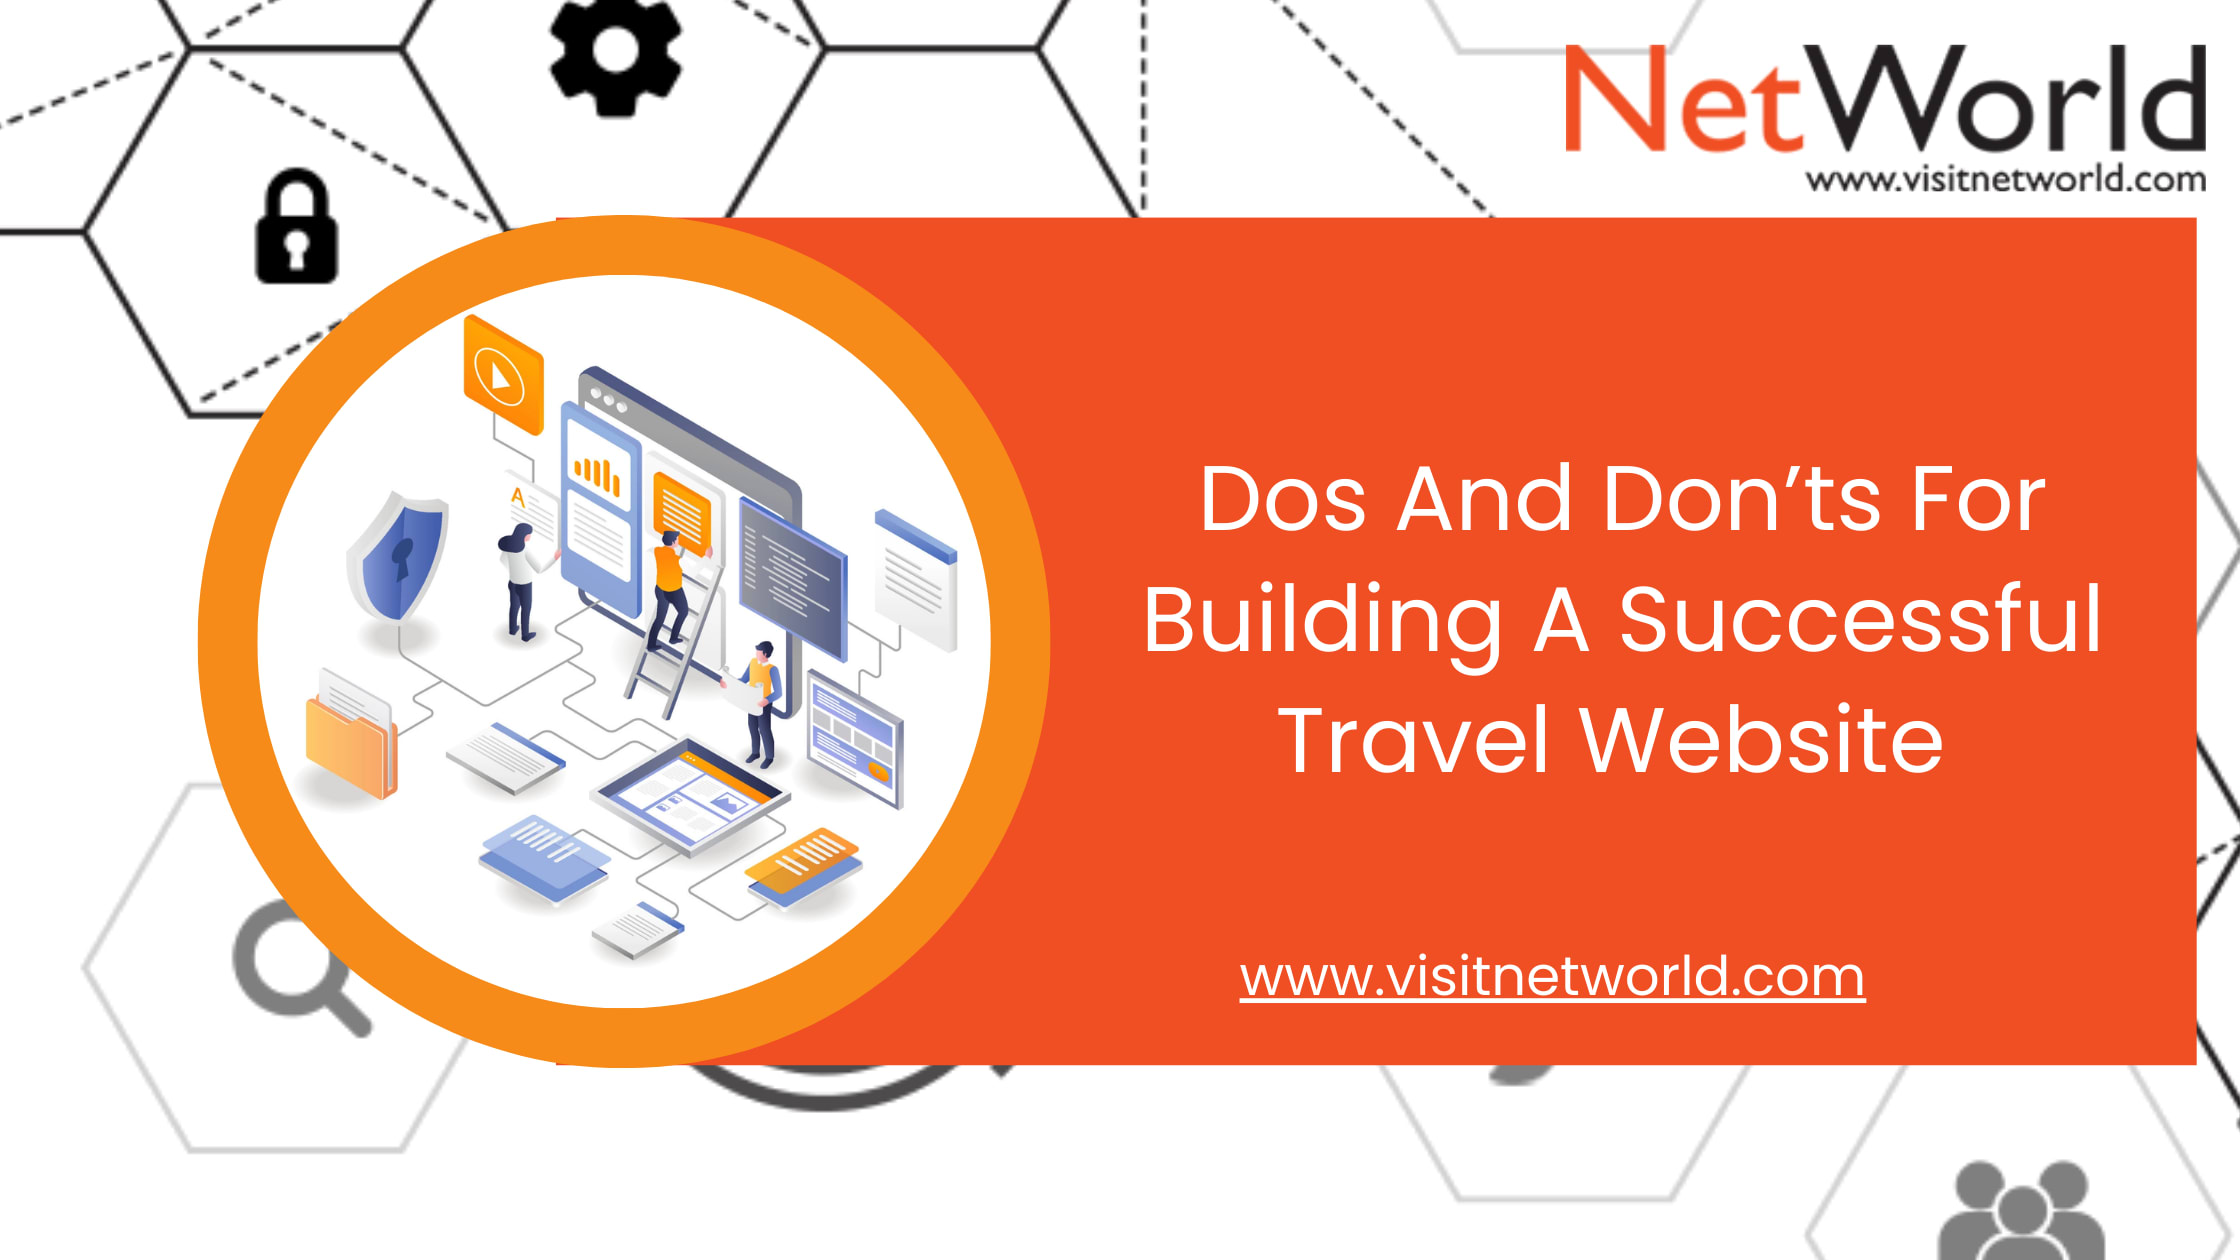 Dos And Don’ts For Building A Successful Travel Website  | 01